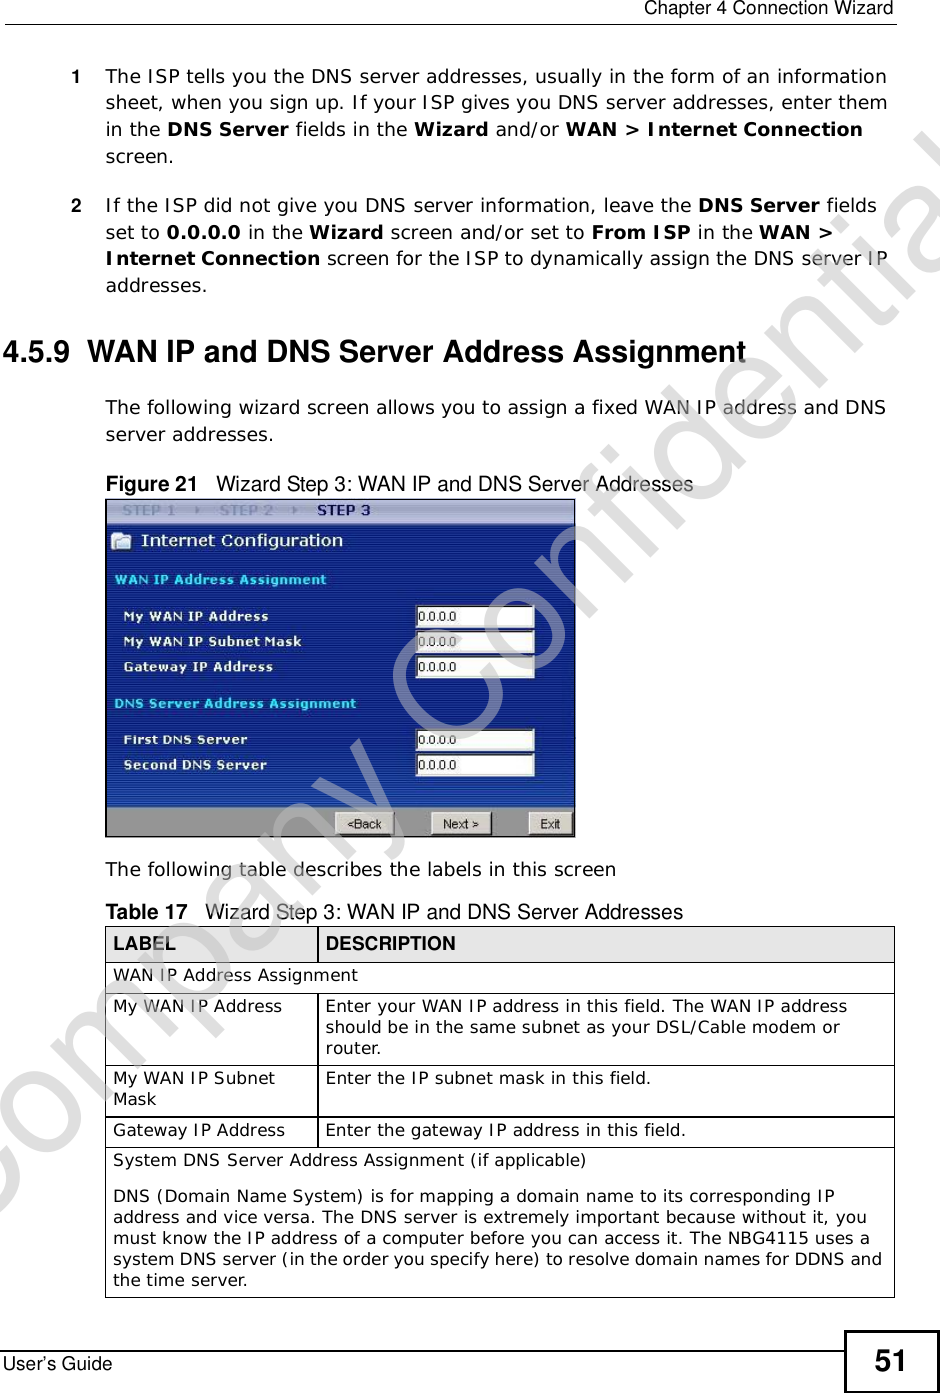  Chapter 4Connection WizardUser’s Guide 511The ISP tells you the DNS server addresses, usually in the form of an information sheet, when you sign up. If your ISP gives you DNS server addresses, enter them in the DNS Server fields in the Wizard and/or WAN&gt; Internet Connectionscreen.2If the ISP did not give you DNS server information, leave the DNS Server fields set to 0.0.0.0 in the Wizard screen and/or set to From ISP in the WAN&gt;Internet Connection screen for the ISP to dynamically assign the DNS server IP addresses.4.5.9  WAN IP and DNS Server Address AssignmentThe following wizard screen allows you to assign a fixed WAN IP address and DNS server addresses. Figure 21   Wizard Step 3: WAN IP and DNS Server AddressesThe following table describes the labels in this screenTable 17   Wizard Step 3: WAN IP and DNS Server AddressesLABEL DESCRIPTIONWAN IP Address Assignment My WAN IP AddressEnter your WAN IP address in this field. The WAN IP address should be in the same subnet as your DSL/Cable modem or router.My WAN IP Subnet Mask Enter the IP subnet mask in this field.Gateway IP Address Enter the gateway IP address in this field. System DNS Server Address Assignment (if applicable)DNS (Domain Name System) is for mapping a domain name to its corresponding IP address and vice versa. The DNS server is extremely important because without it, you must know the IP address of a computer before you can access it. The NBG4115 uses a system DNS server (in the order you specify here) to resolve domain names for DDNS and the time server.Company Confidential